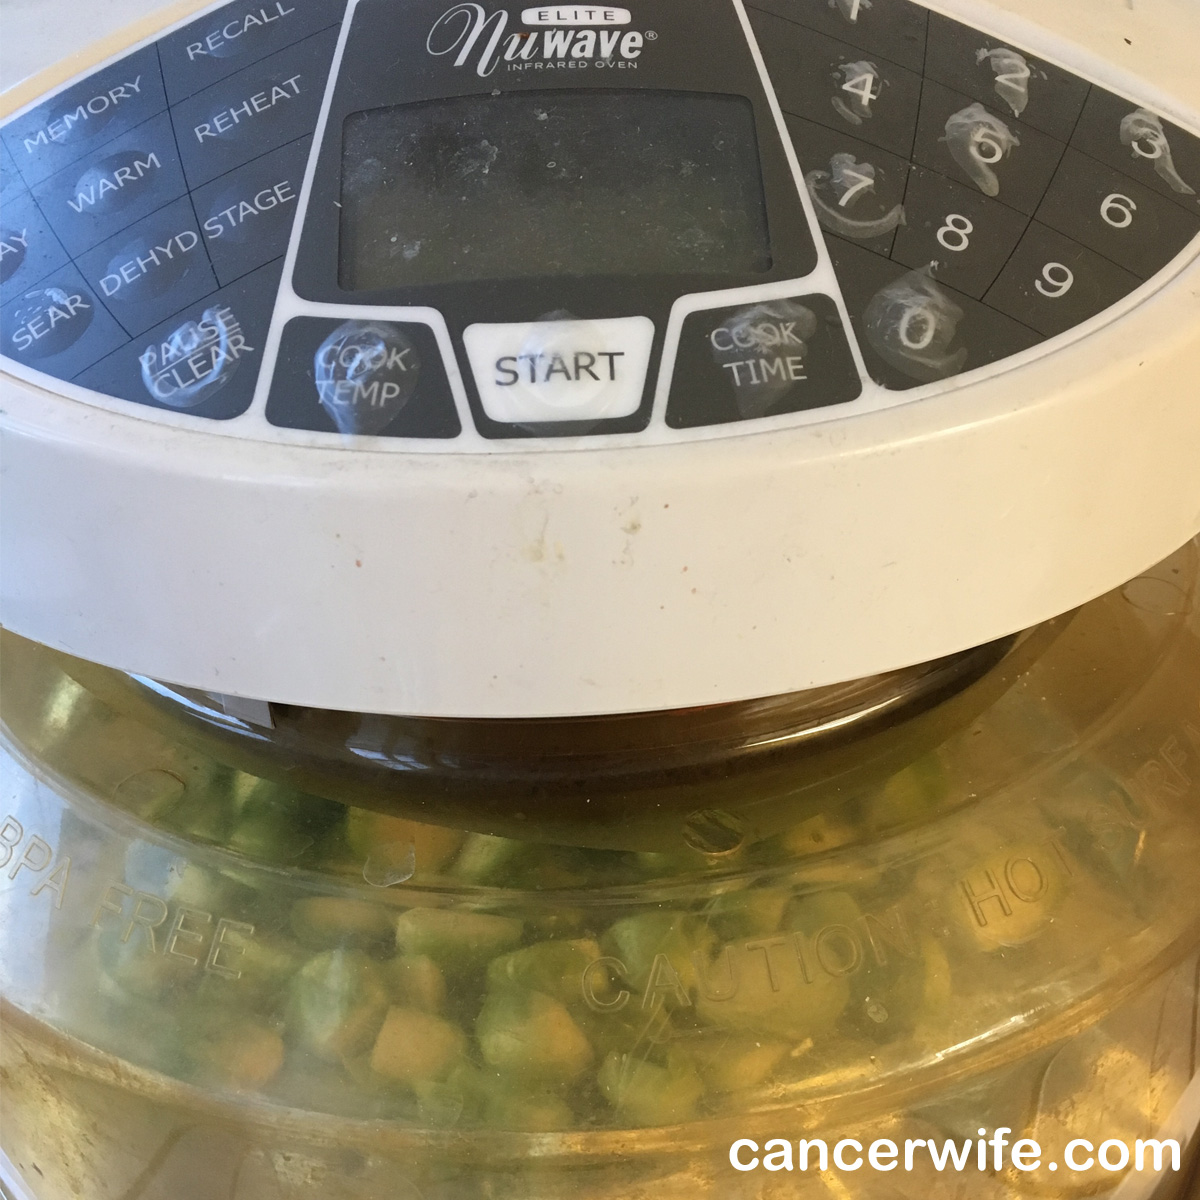 Nuwave Oven roasted brussel sprouts recipe